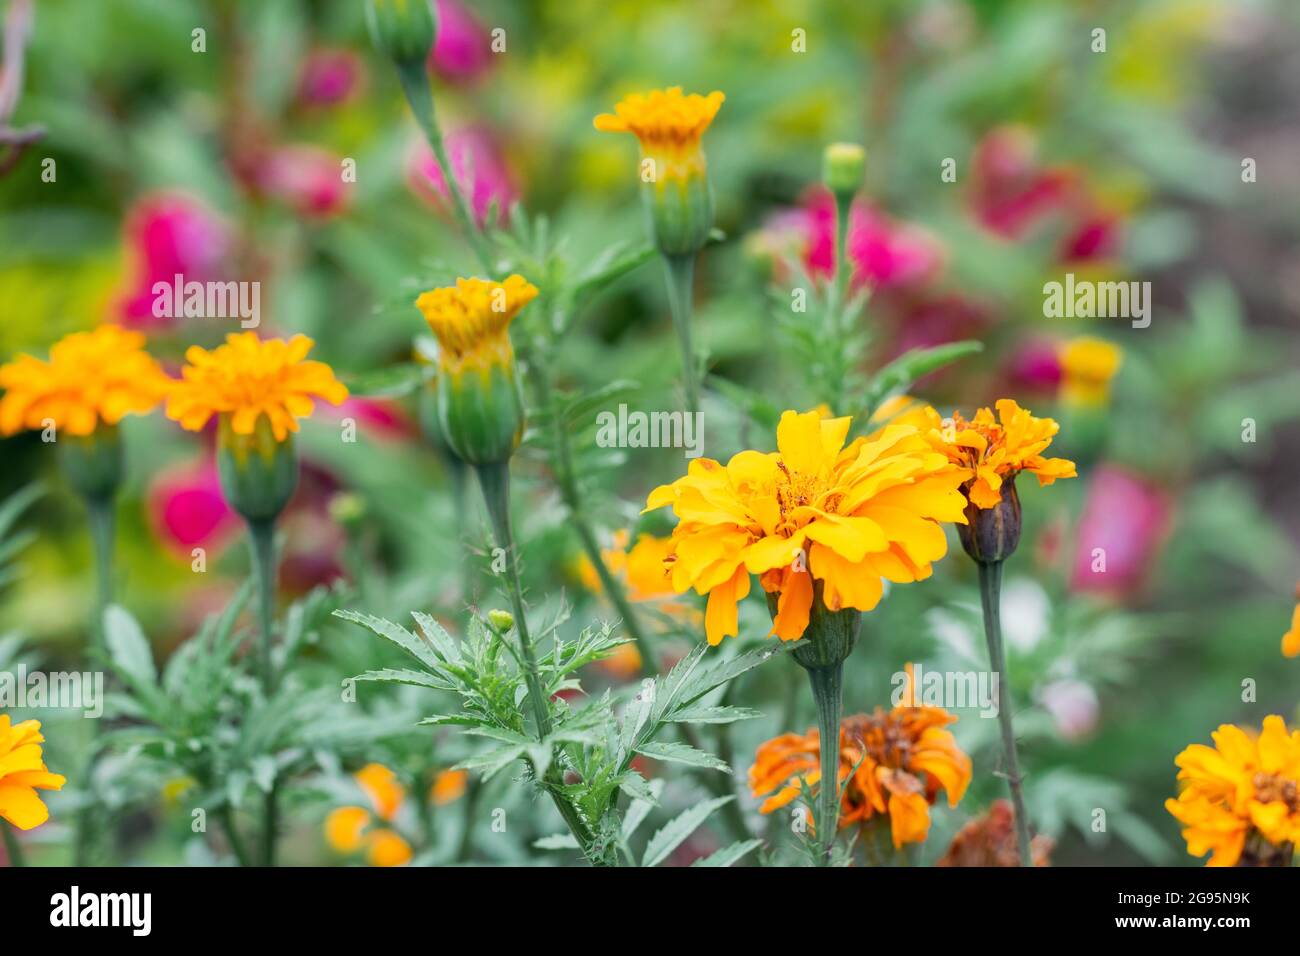 Tagetes erecta, flower with yellow petals and green leaves native to Mexico, where it is found in the wild mainly  in the states of Chiapas, Mexico, M Stock Photo